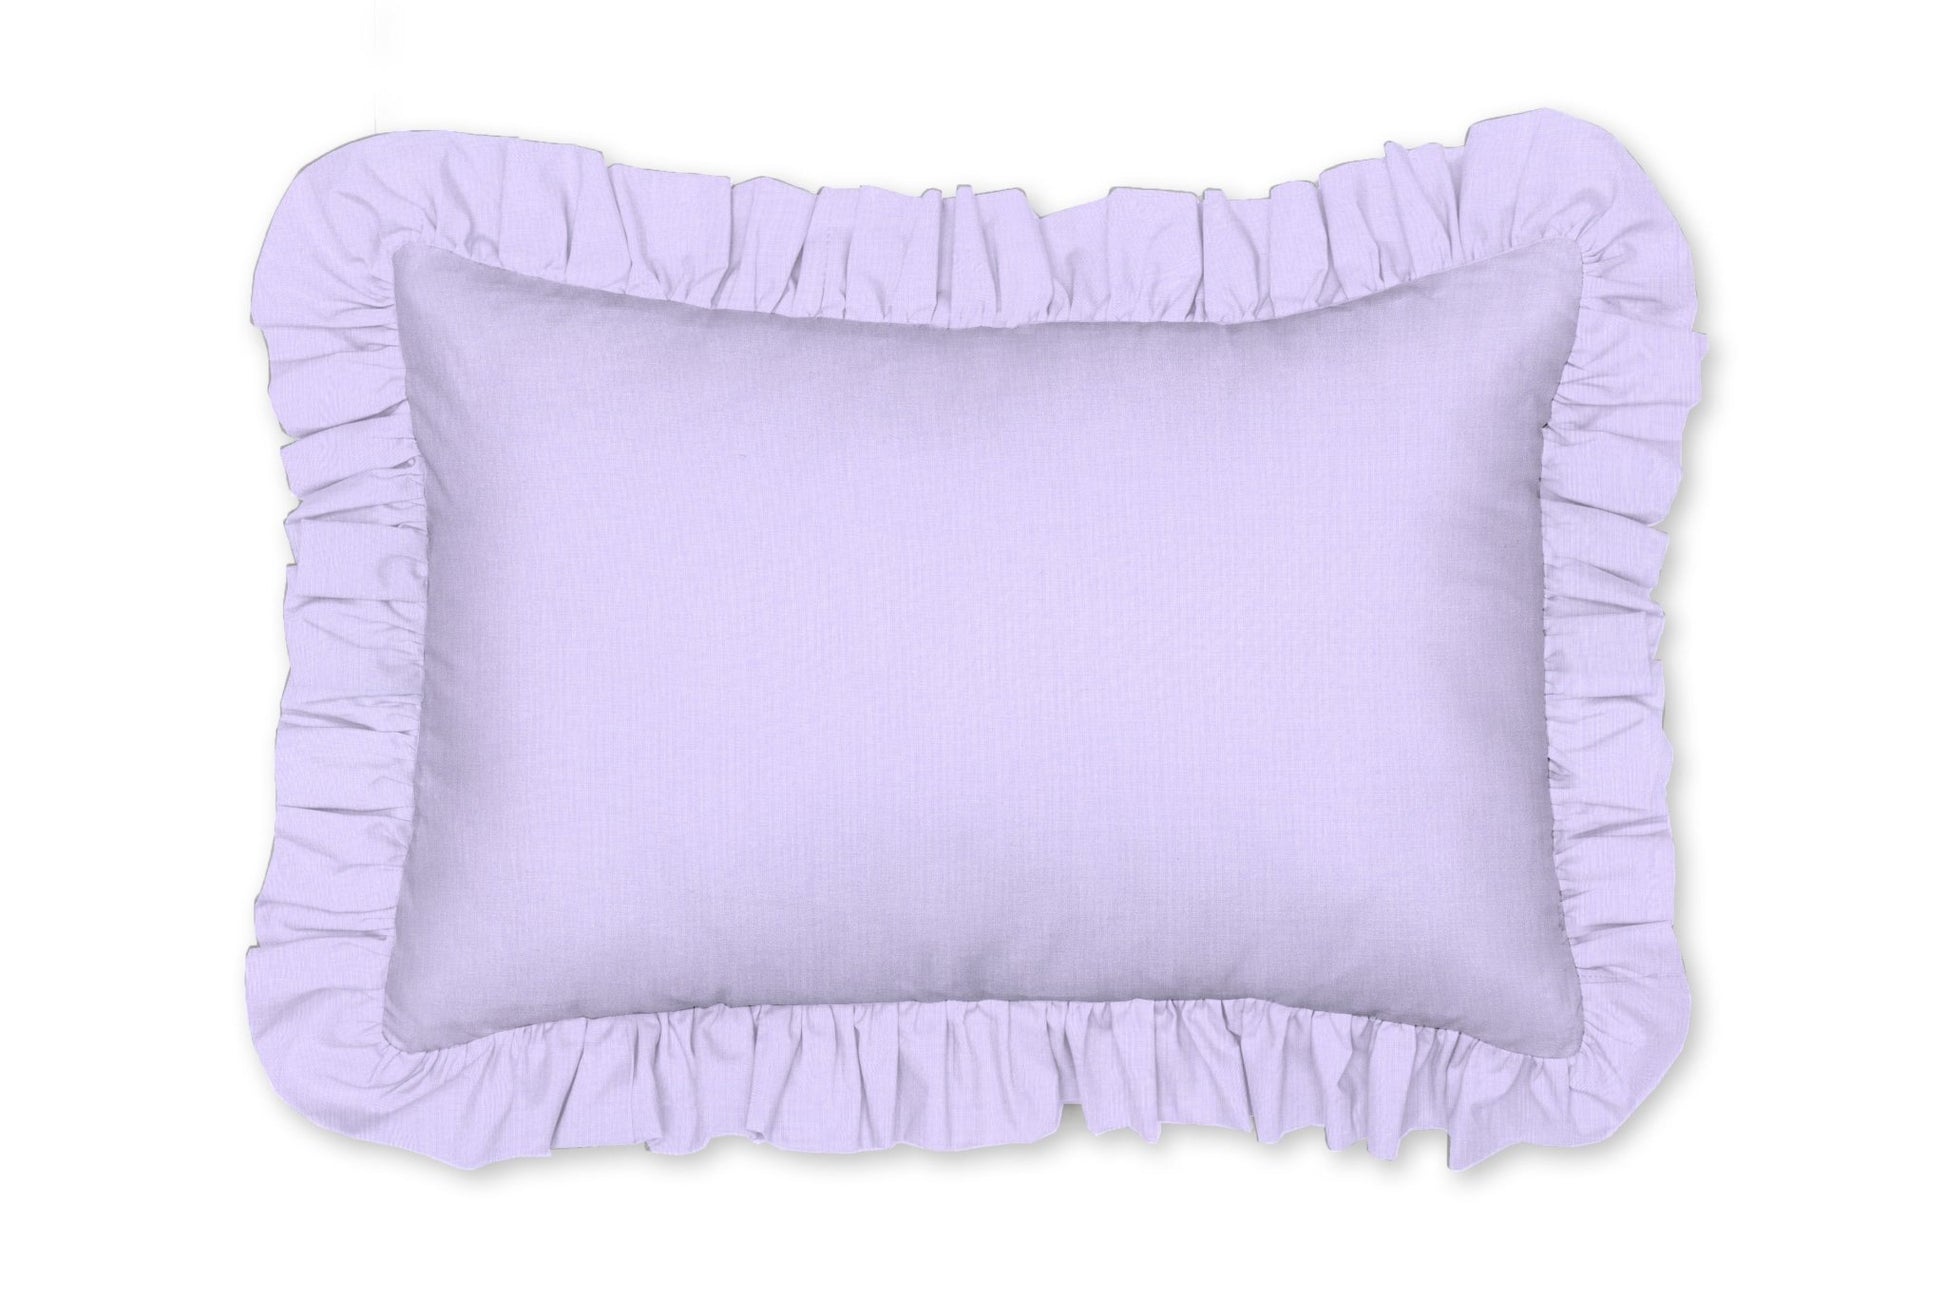 Solid Lilac Decorative Pillow with Ruffle - New Arrivals Inc